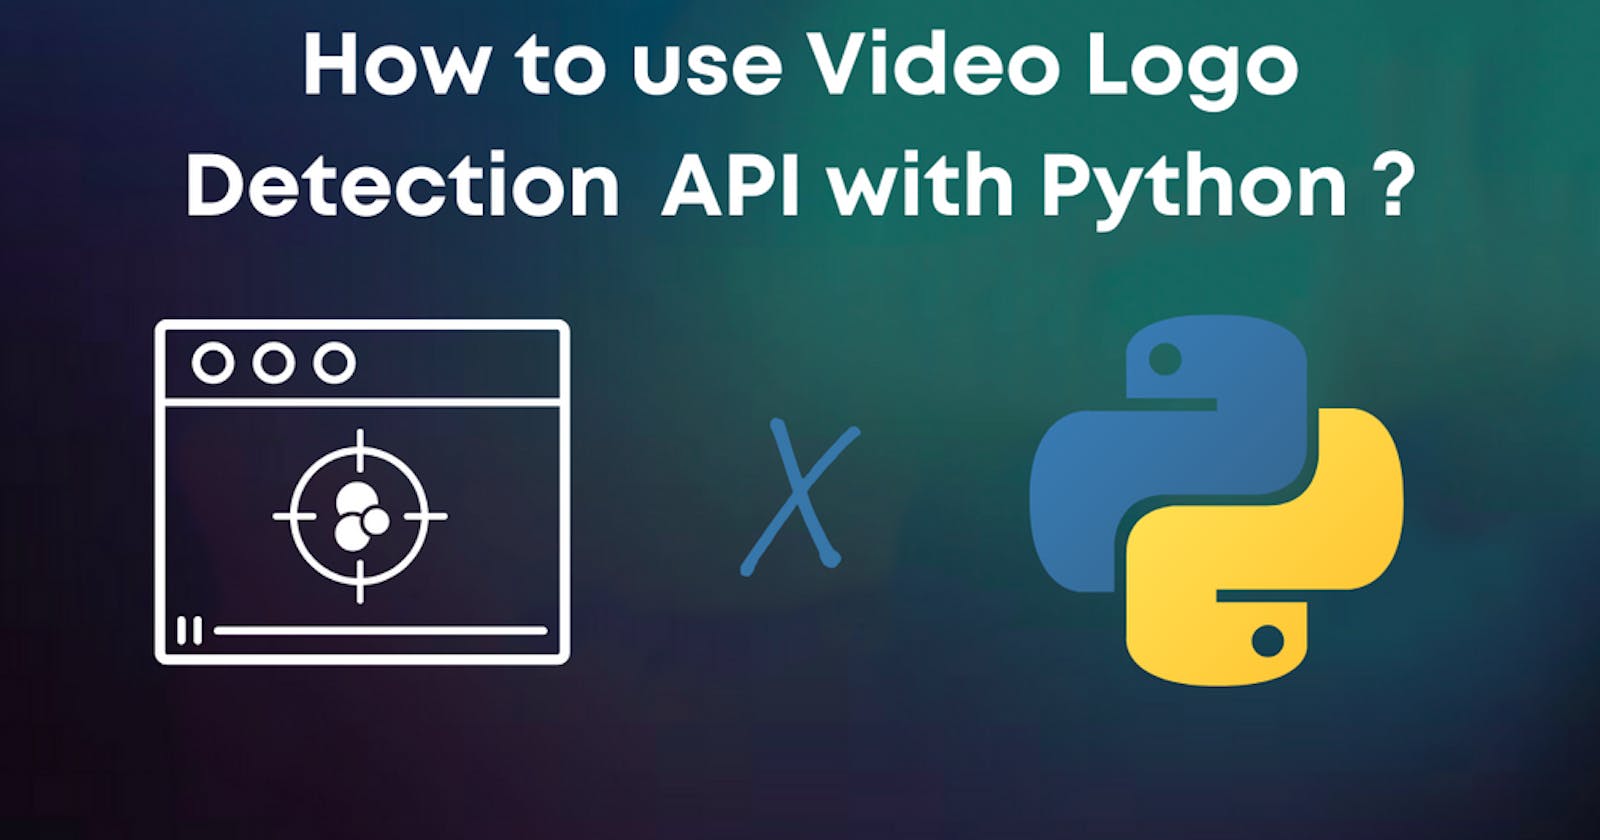 How to use Video Logo Detection API with Python in 5 minutes?